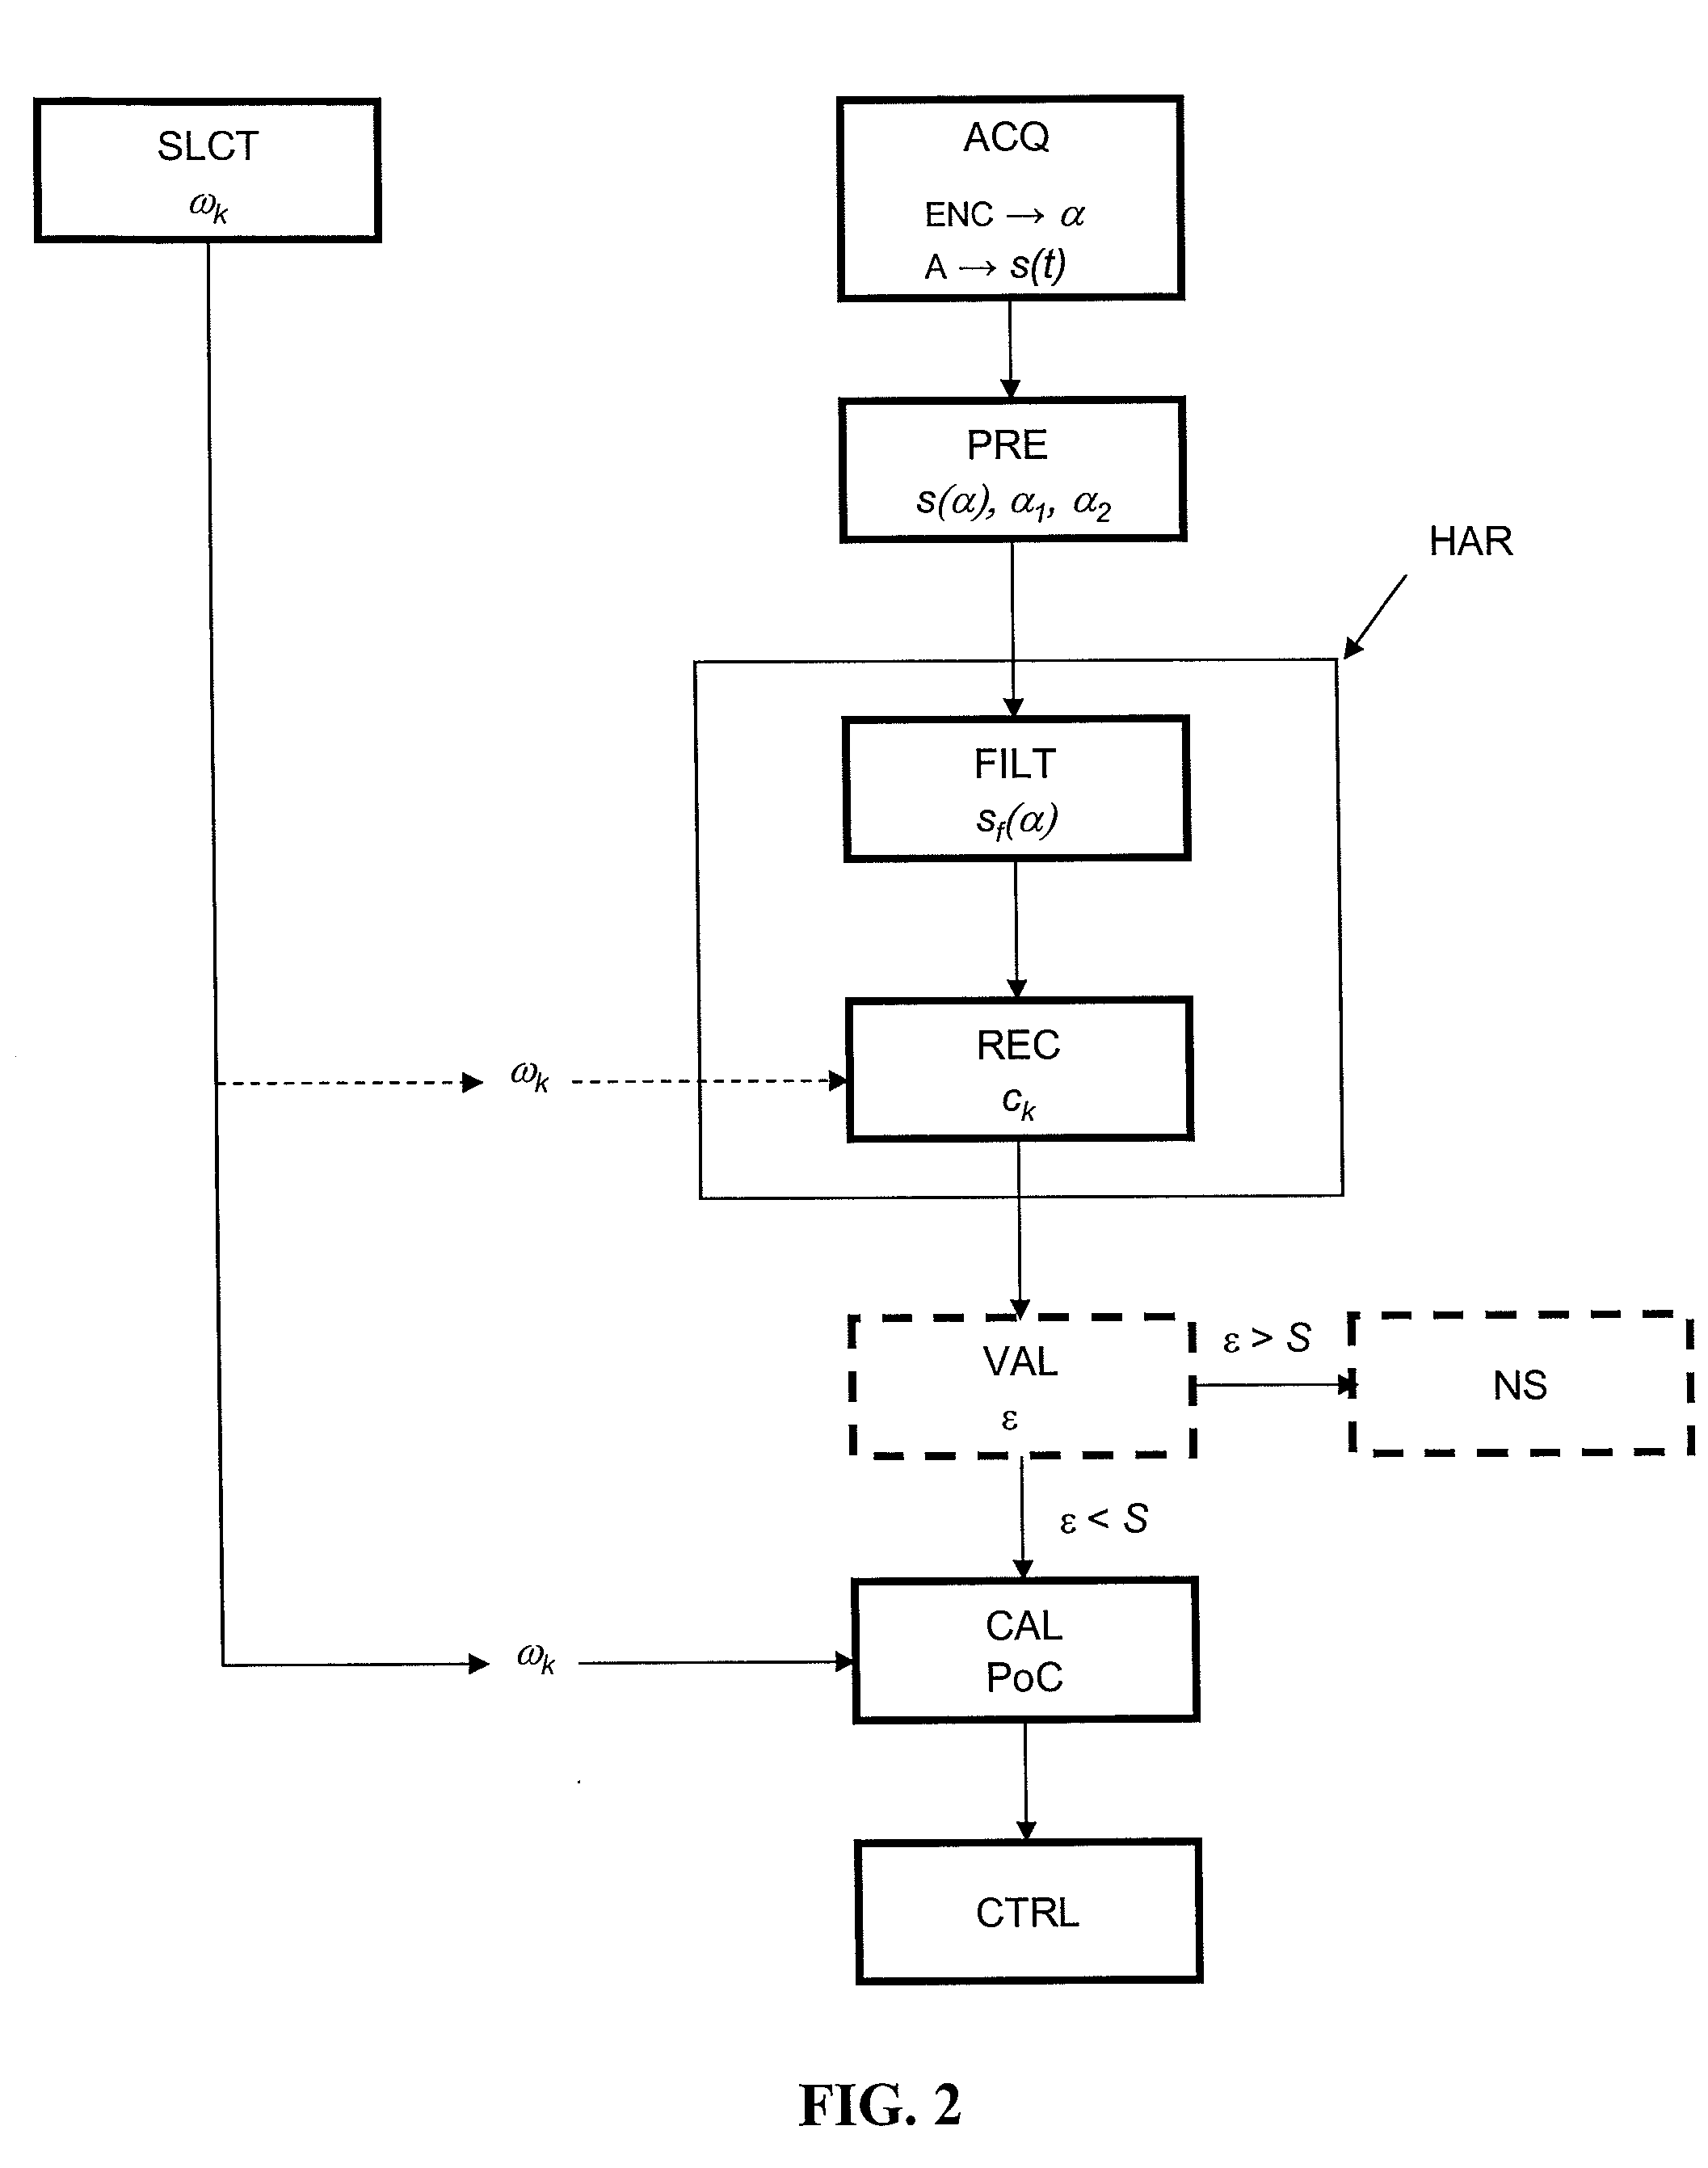 Method for Real-Time Estimation of Engine Combustion Parameters from Vibratory Signals